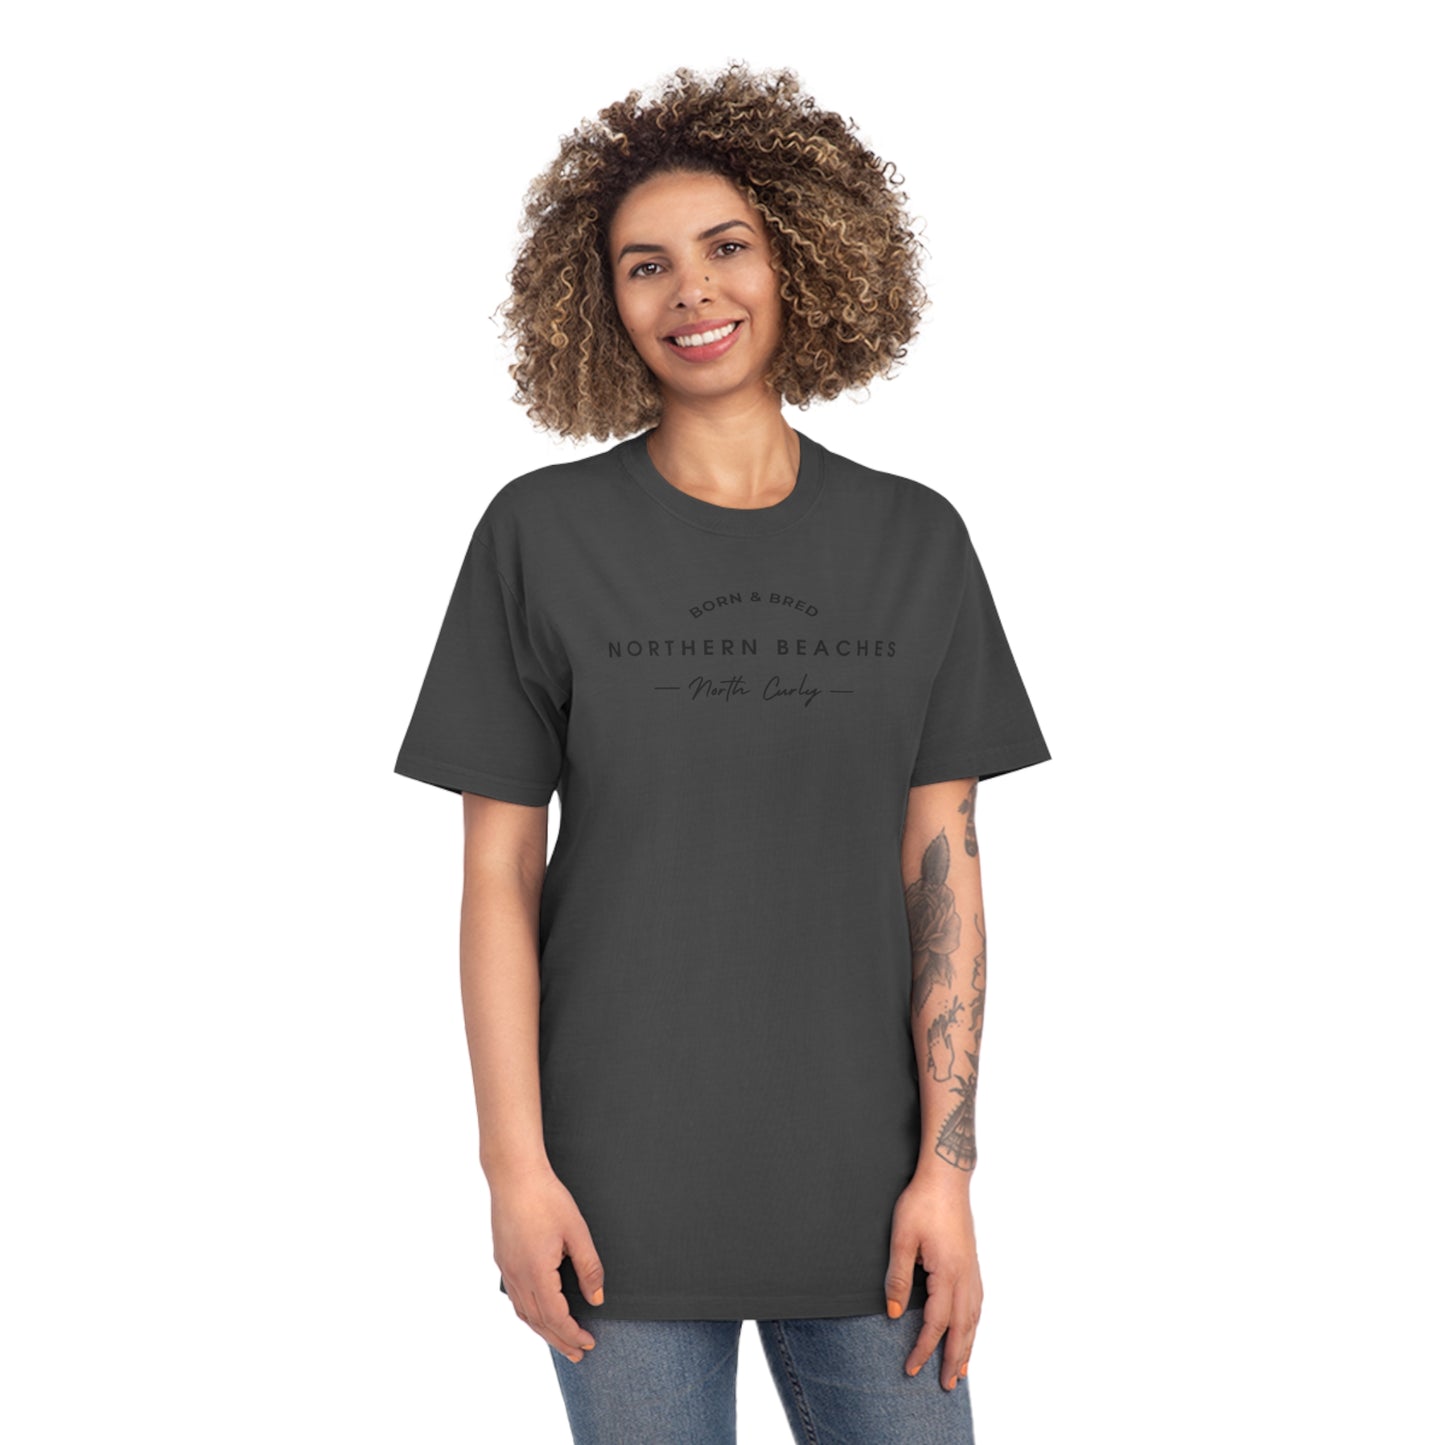 Northern Beaches Nth Curly bnb AS Colour 100% Cotton Unisex Faded Shirt